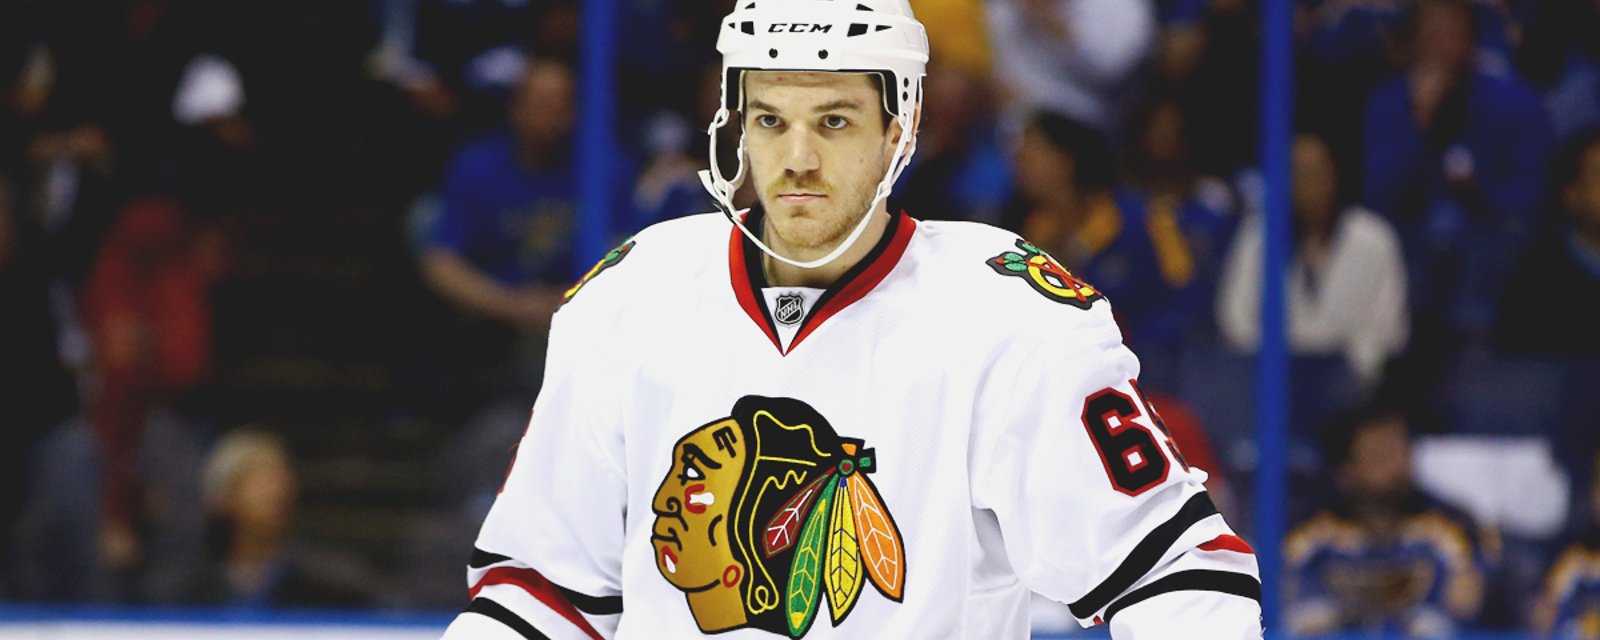 Breaking: NHL head coach could have been fired after humiliating Andrew Shaw.